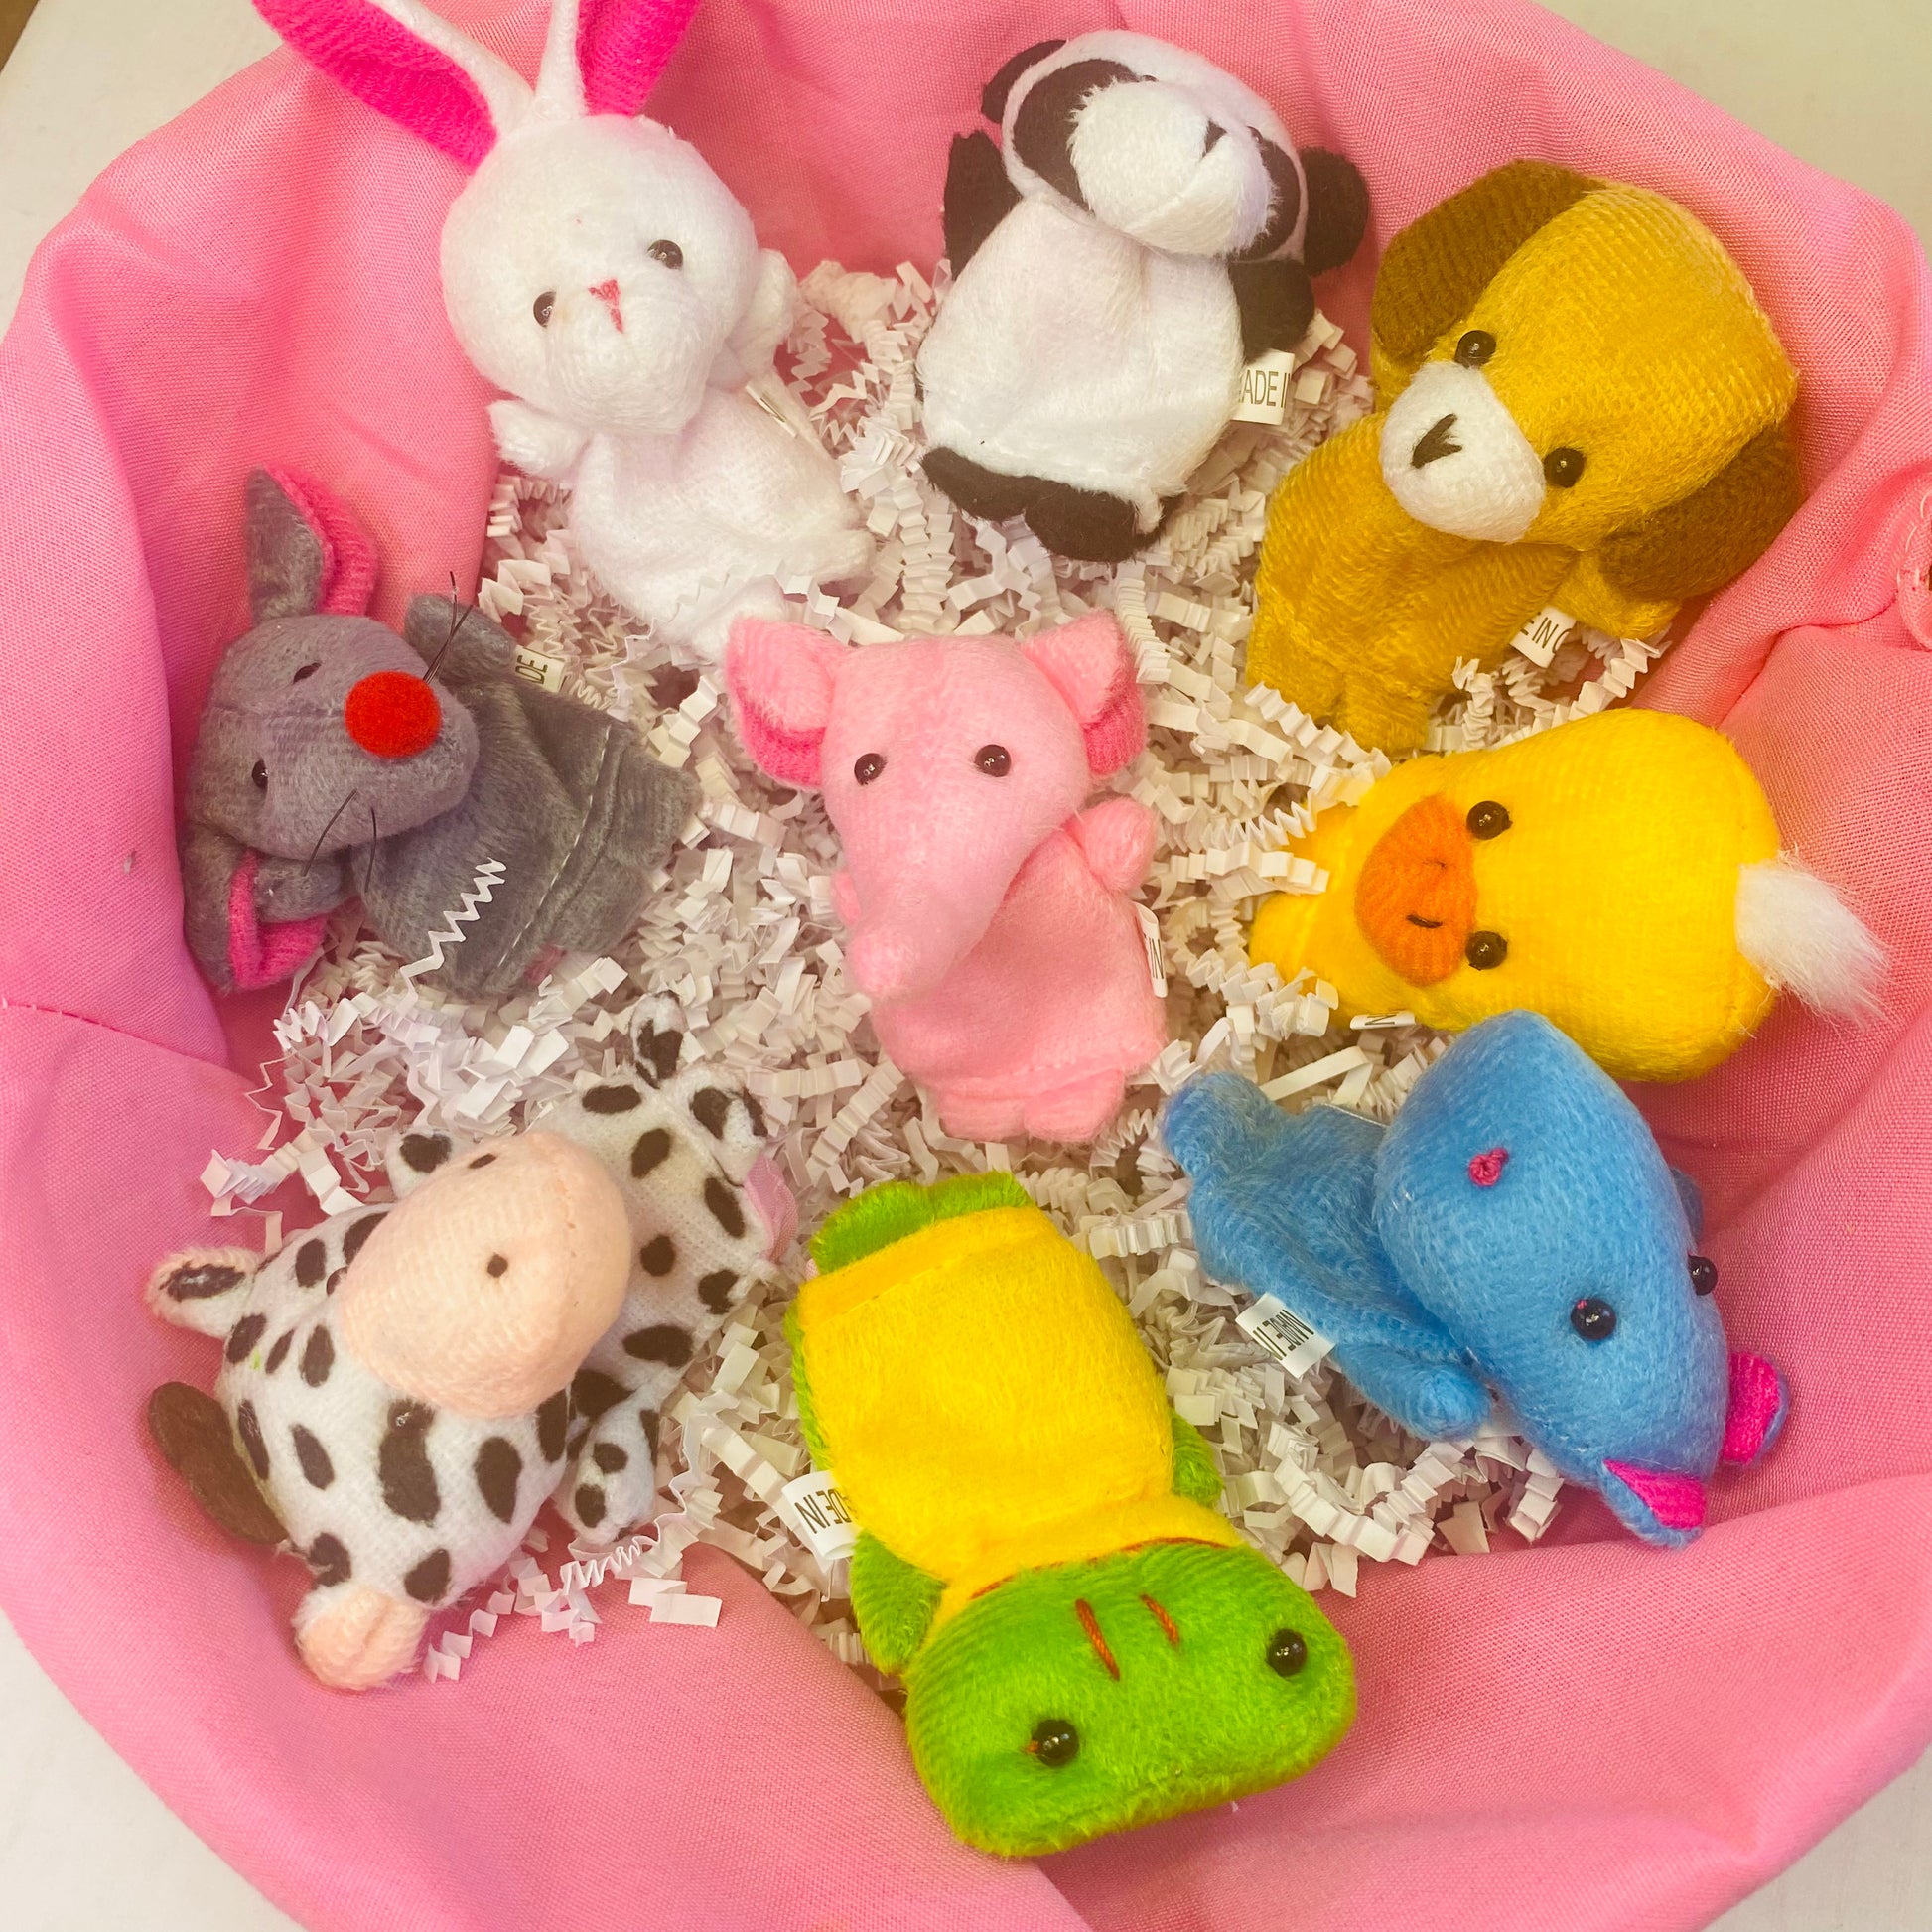 Adorable animal finger puppets for story telling fun! Pretend play toys for kids ages 3-5 years old. Educational toys to build your child's imagination and creativity.